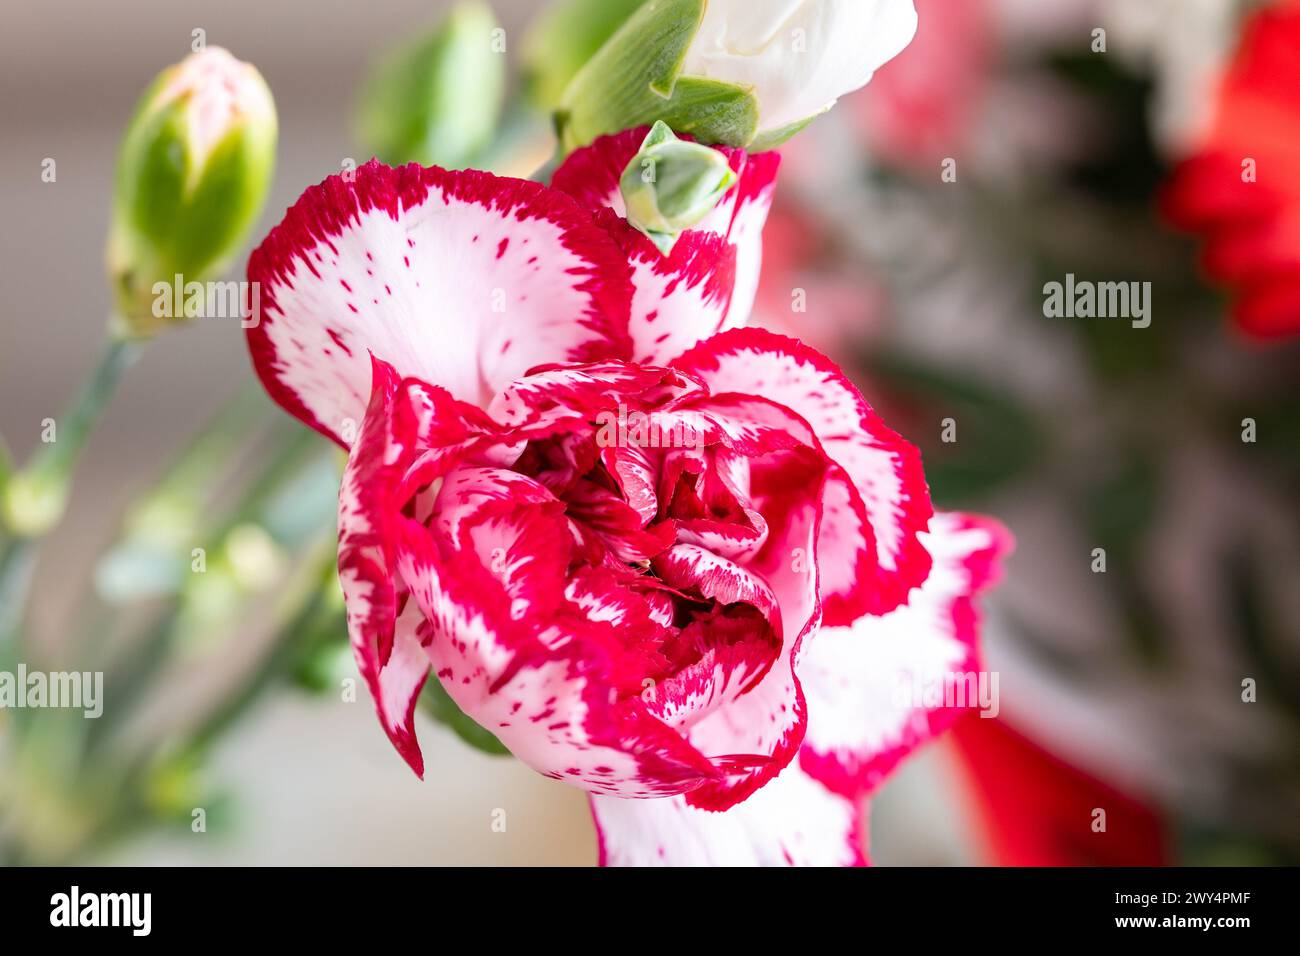 Carnation clove pink flower (Dianthus caryophyllus) with messy petals Stock Photo